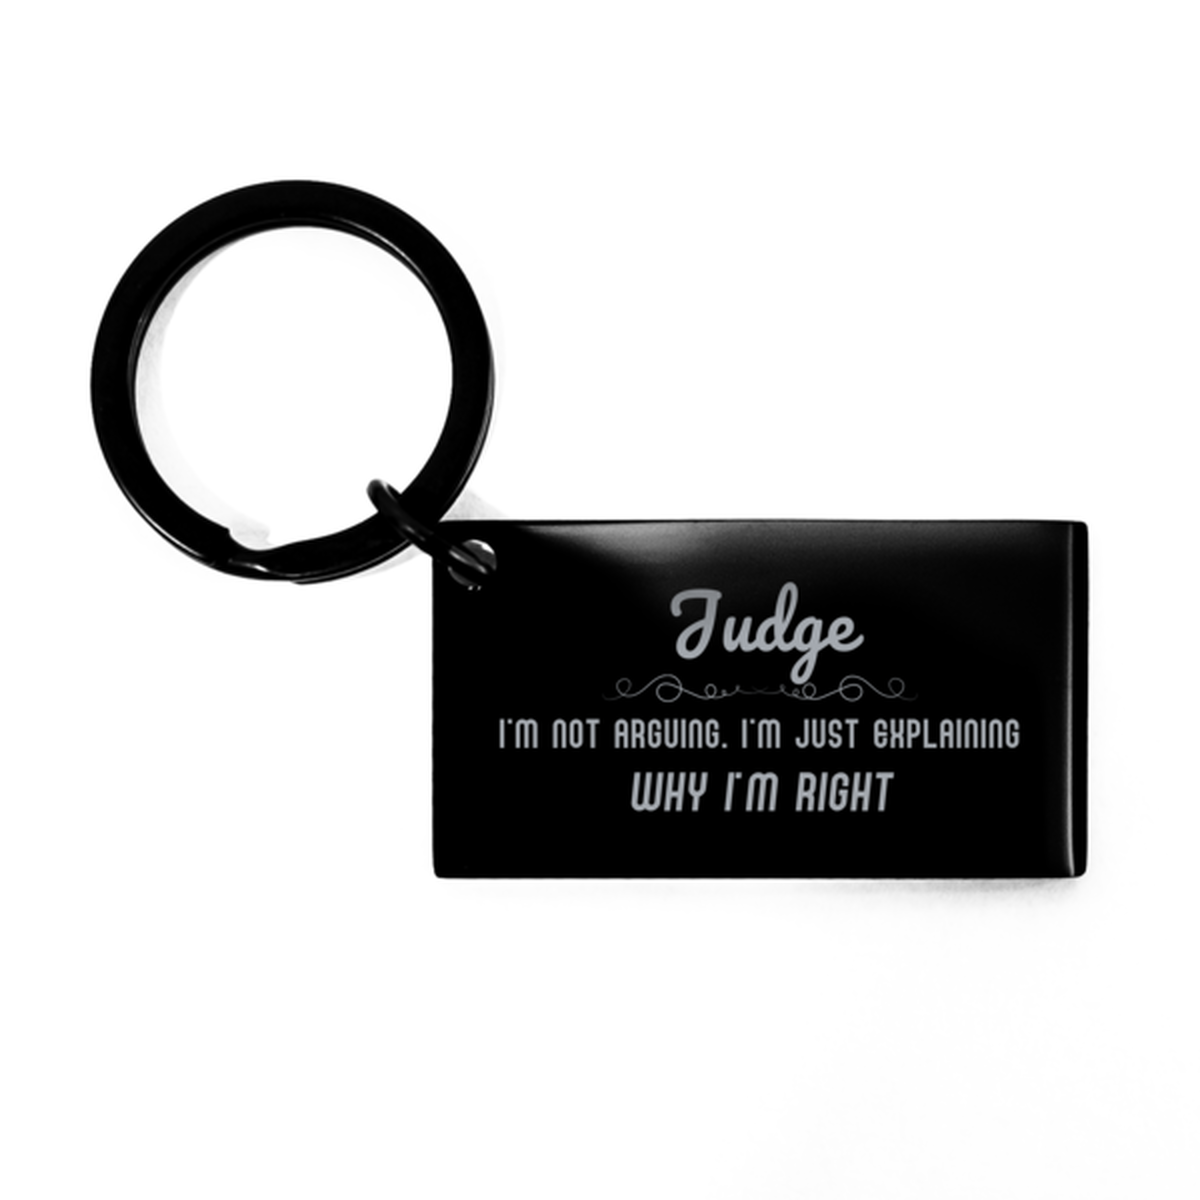 Judge I'm not Arguing. I'm Just Explaining Why I'm RIGHT Keychain, Funny Saying Quote Judge Gifts For Judge Graduation Birthday Christmas Gifts for Men Women Coworker